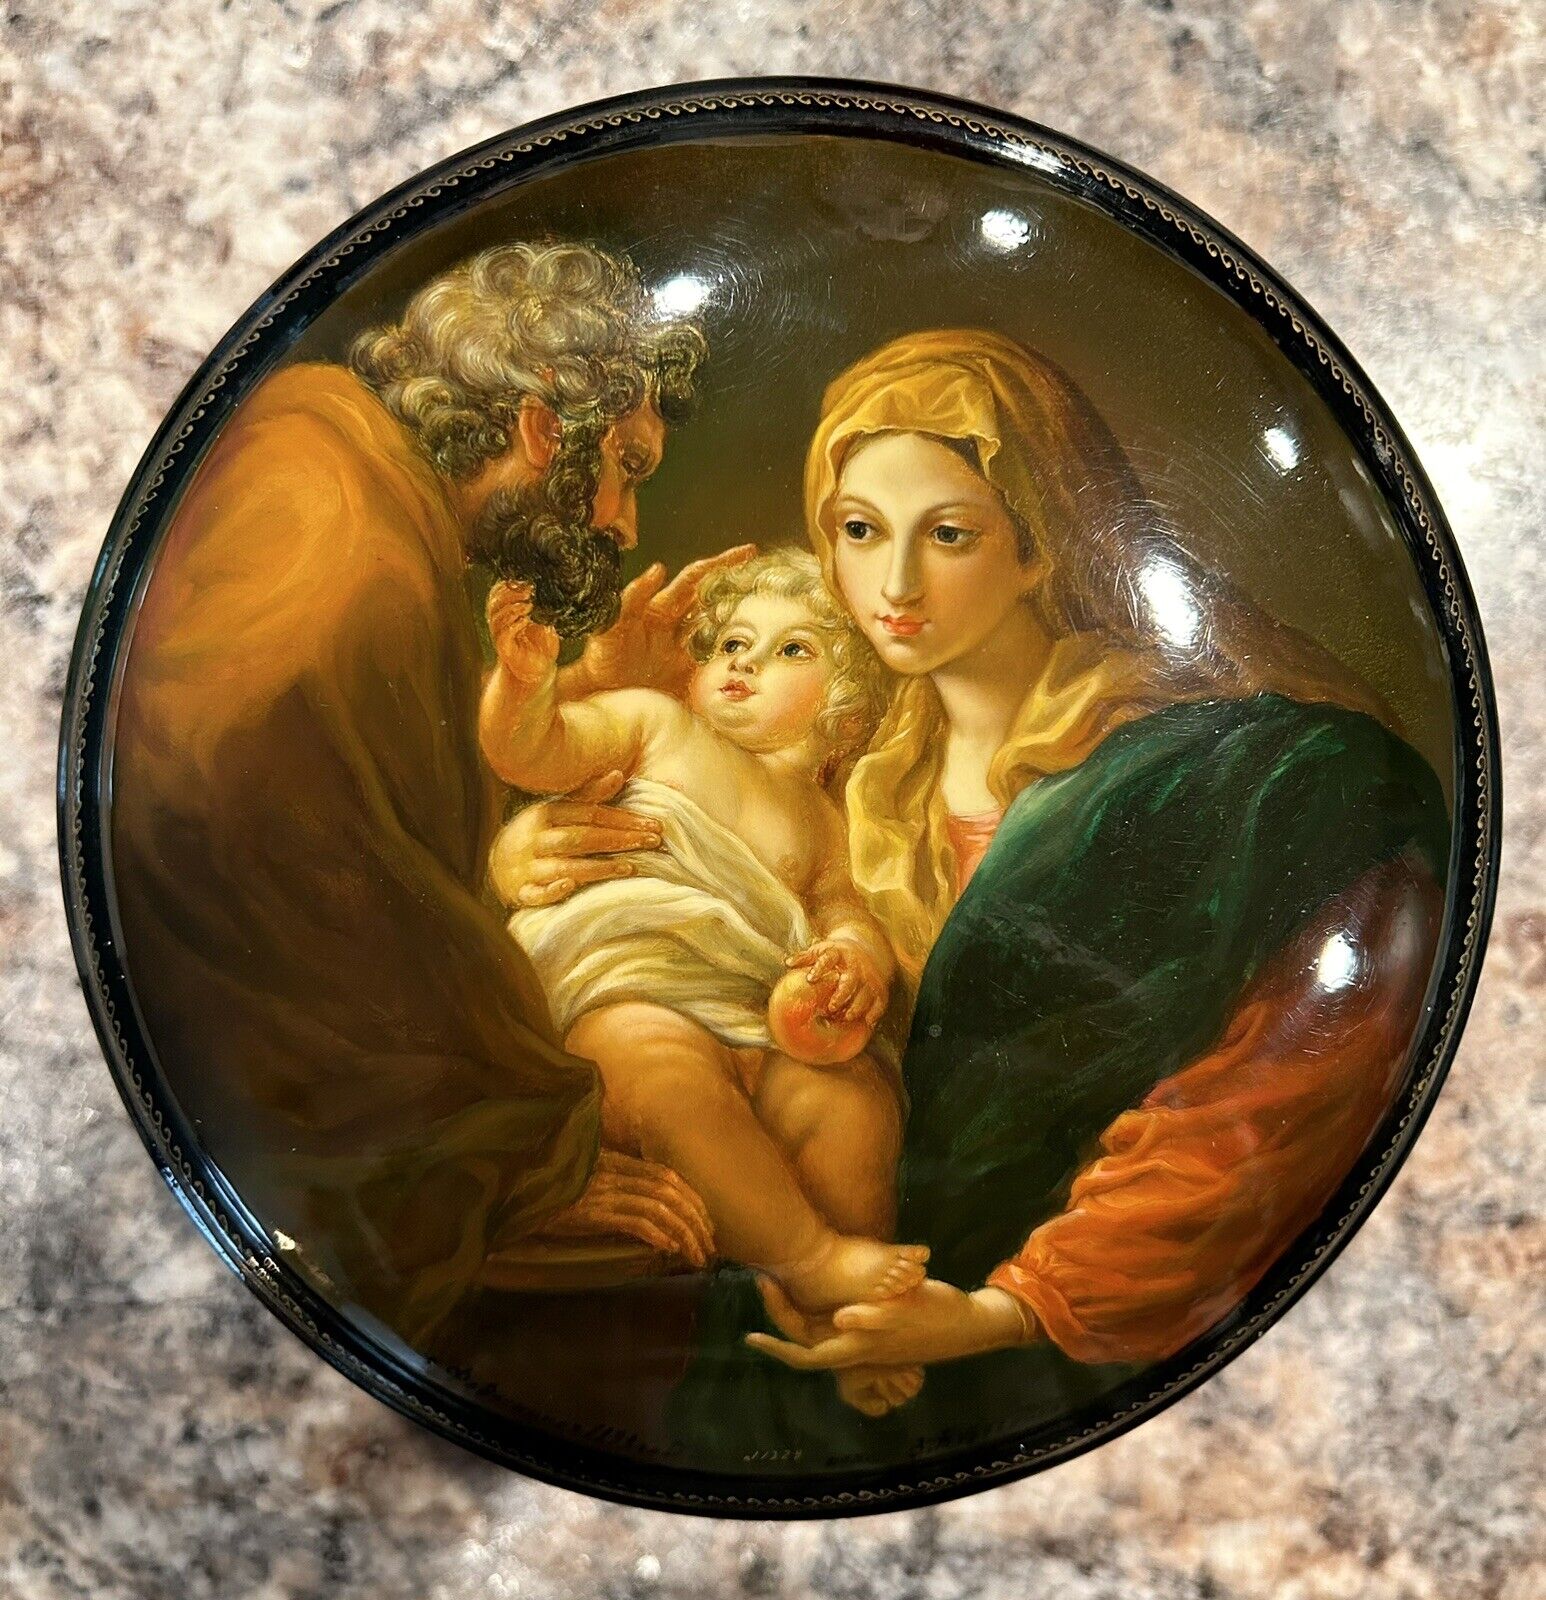 Authentic Fedoskino Russian Hand Painted Lacquer Box “The Holy Family” Buzovkina